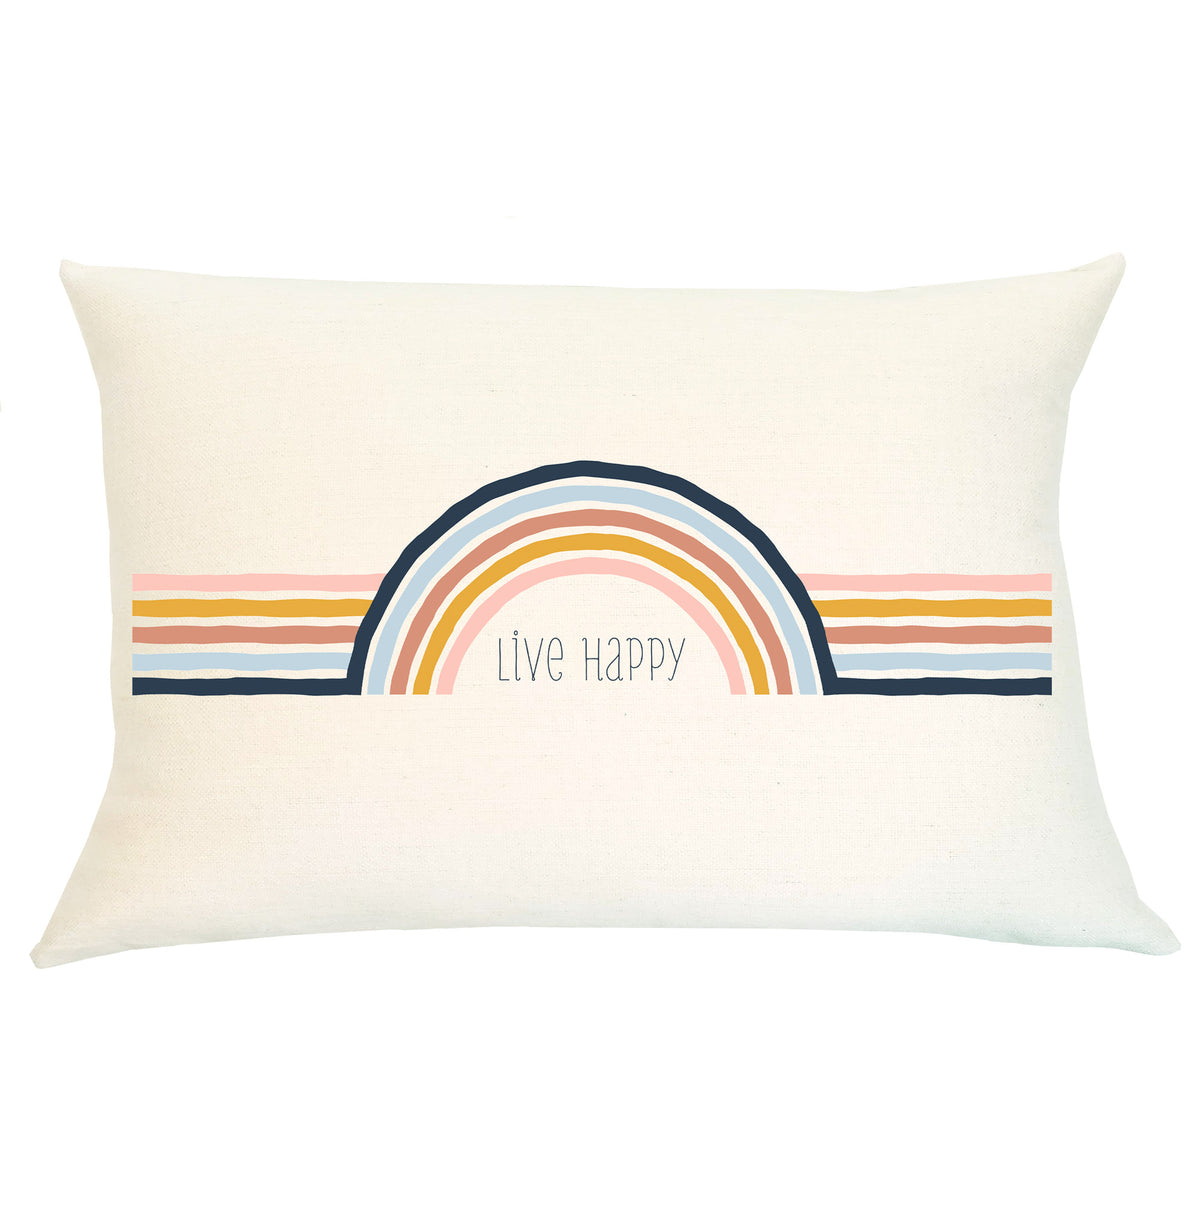 Pillow Lumbar - Live Happy - Insert Included